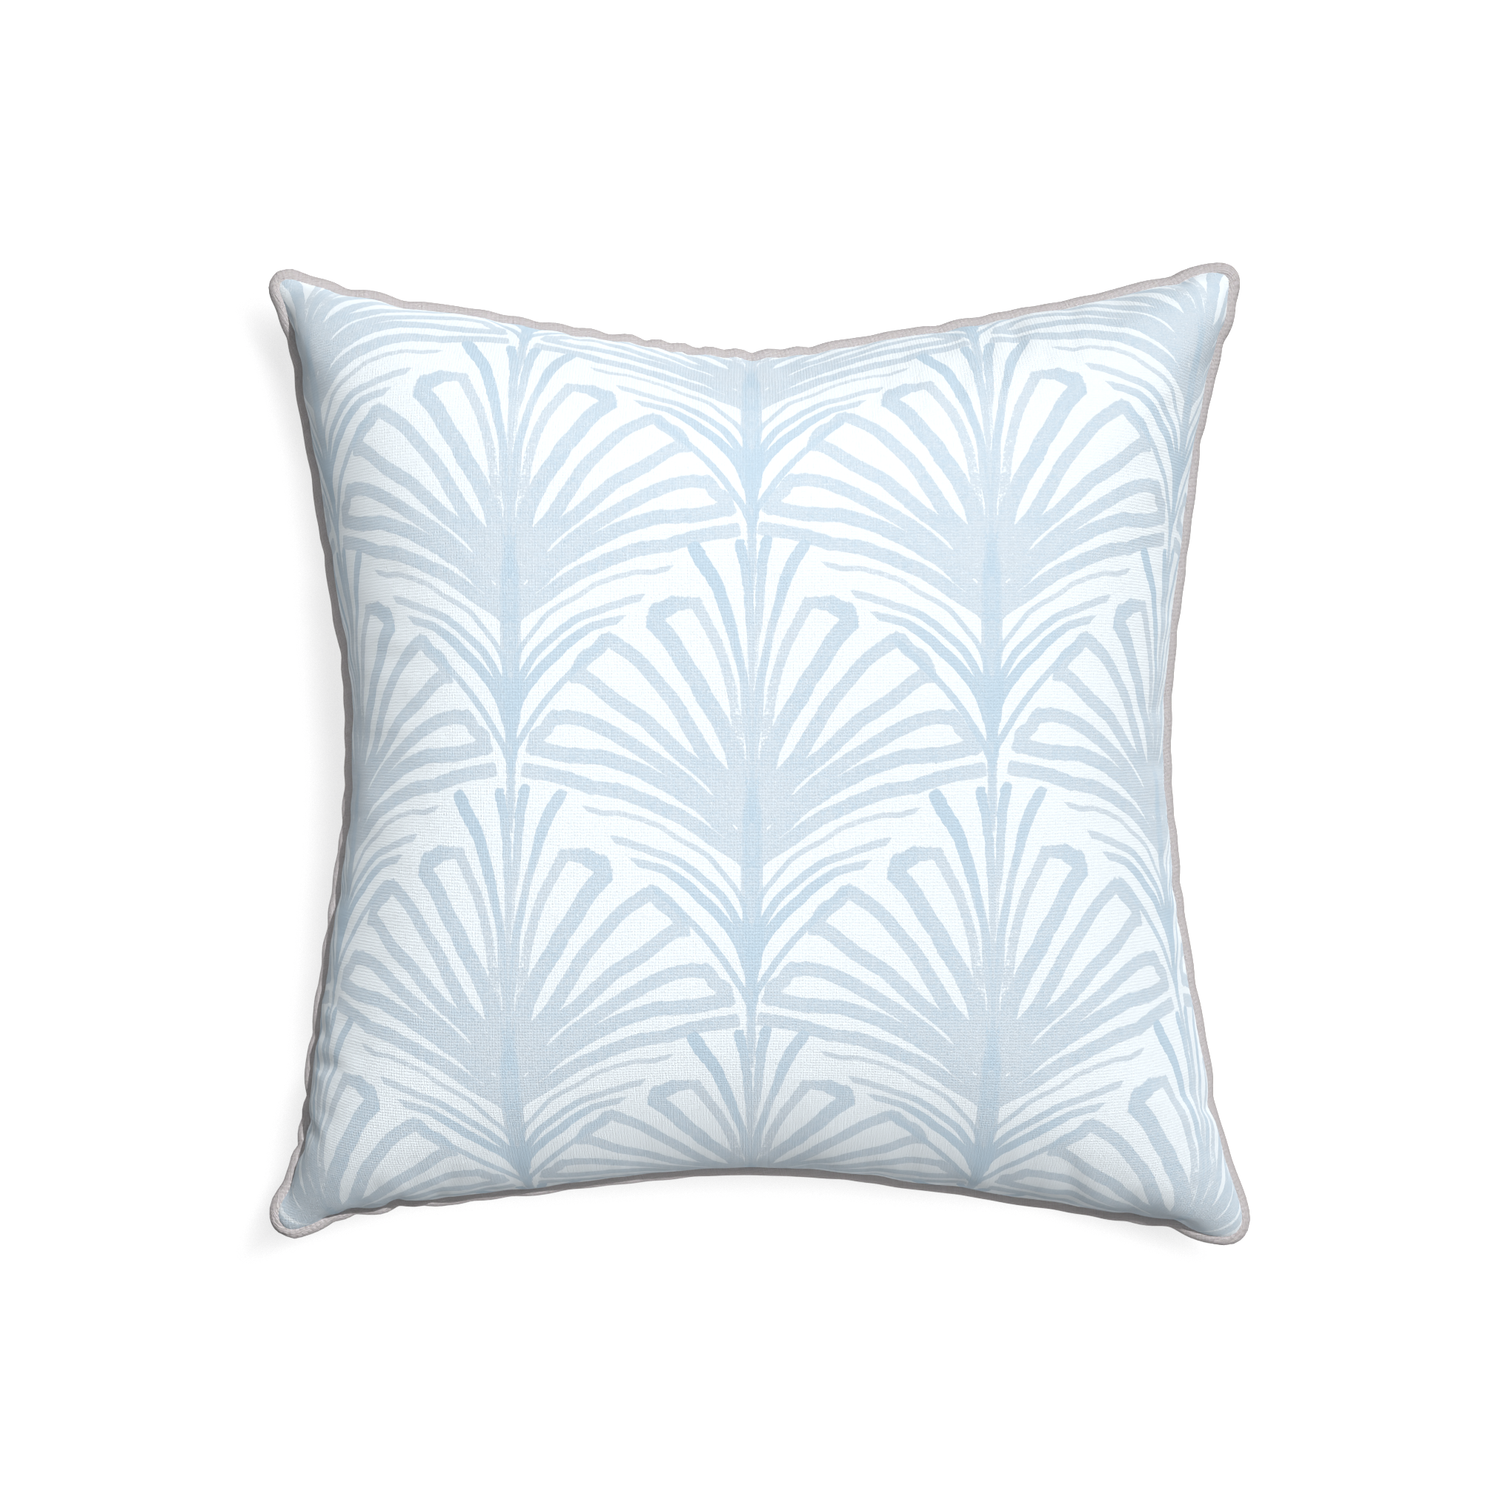 22-square suzy sky custom pillow with pebble piping on white background